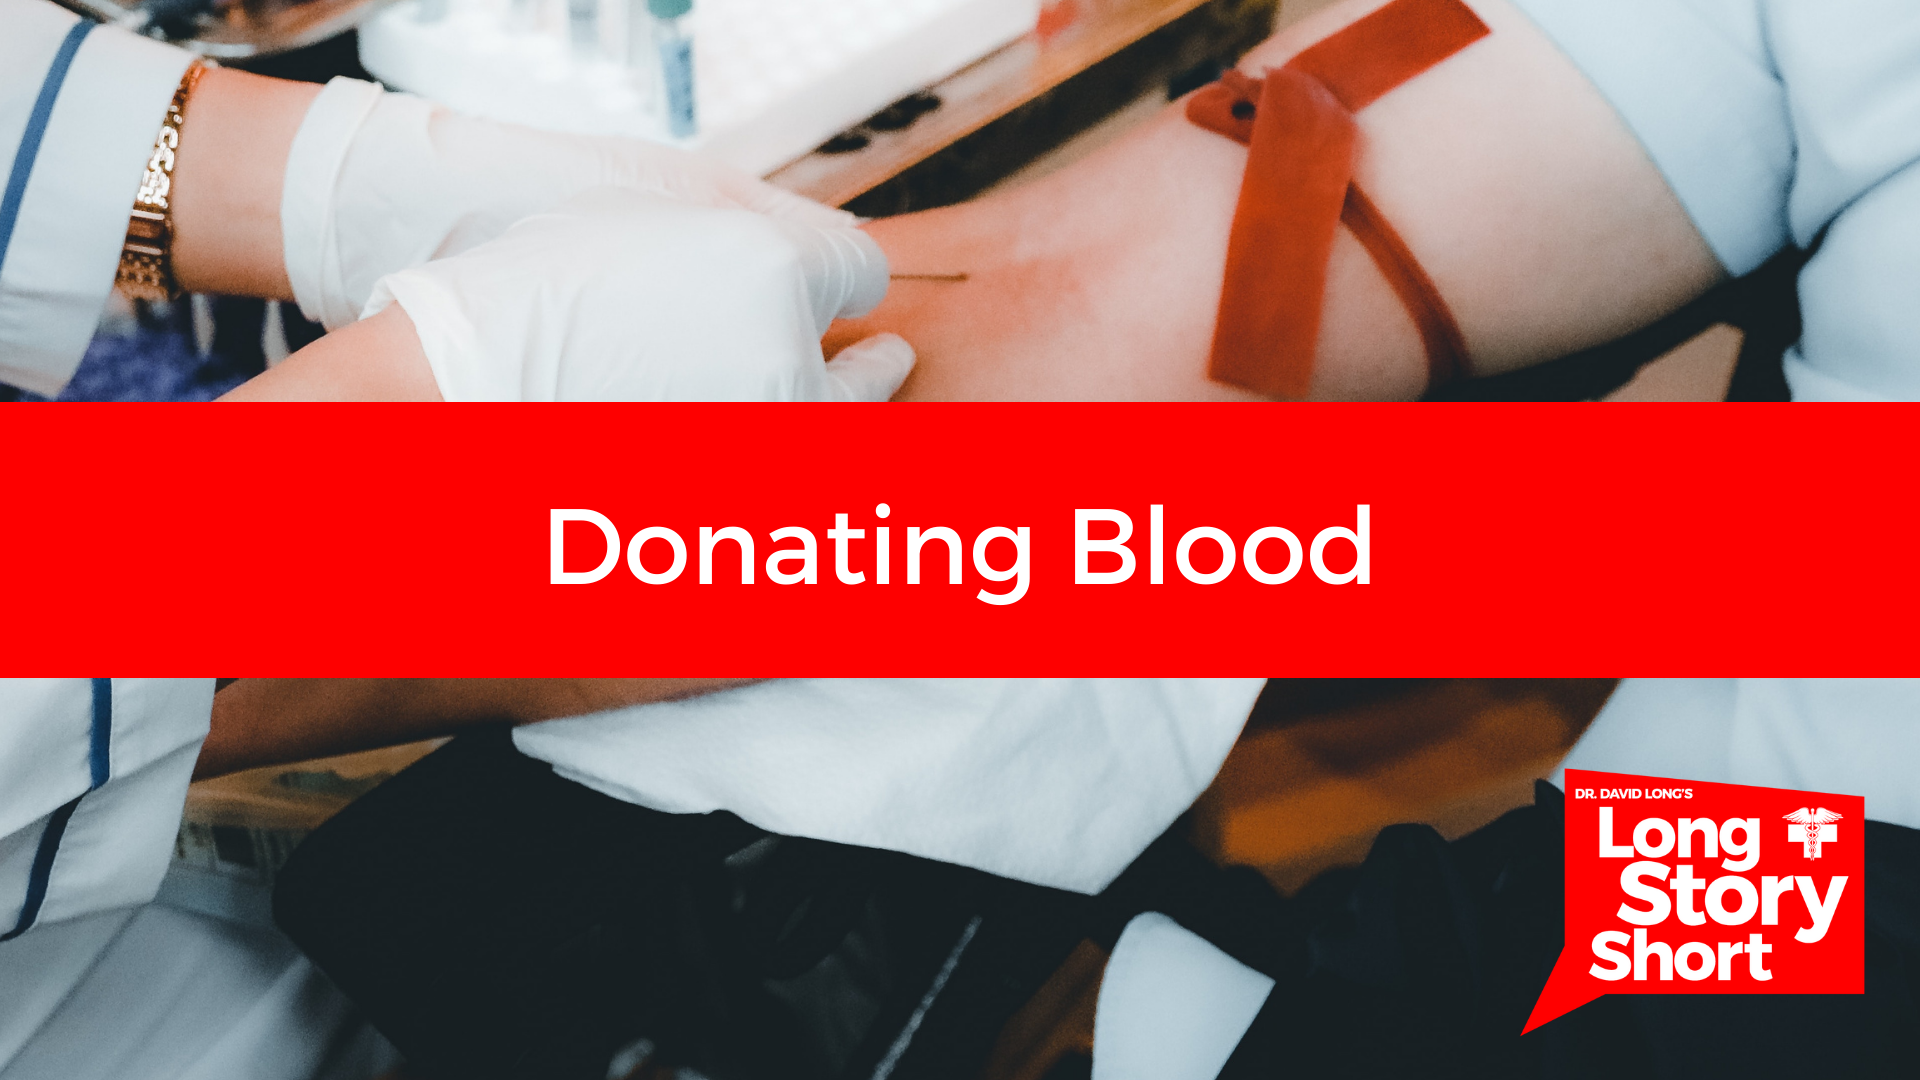 You are currently viewing Donating Blood – Dr. David Long